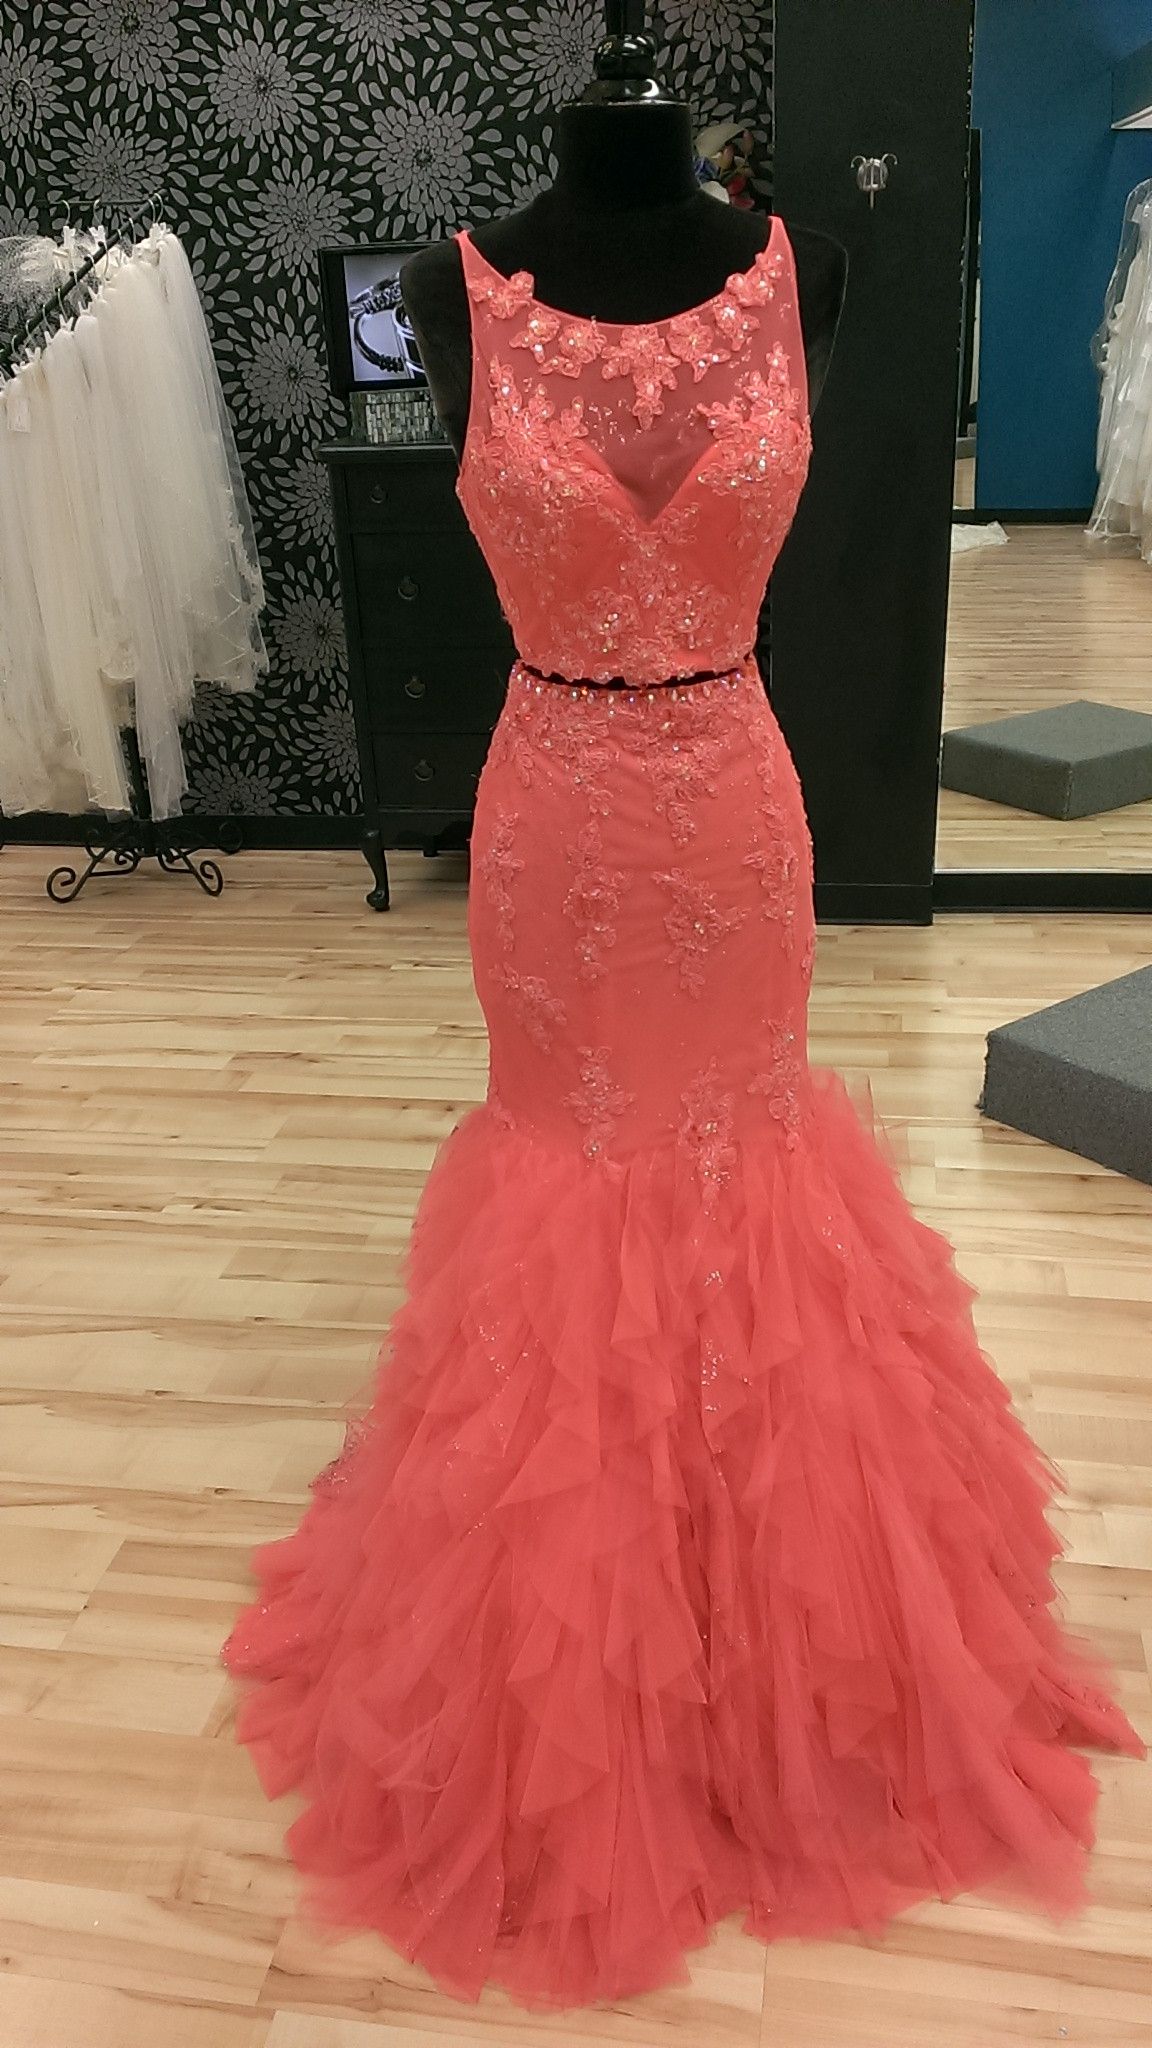 Coral Lace Appliques Two Piece Mermaid Prom Dress 2017 Ruffles Evening Gowns